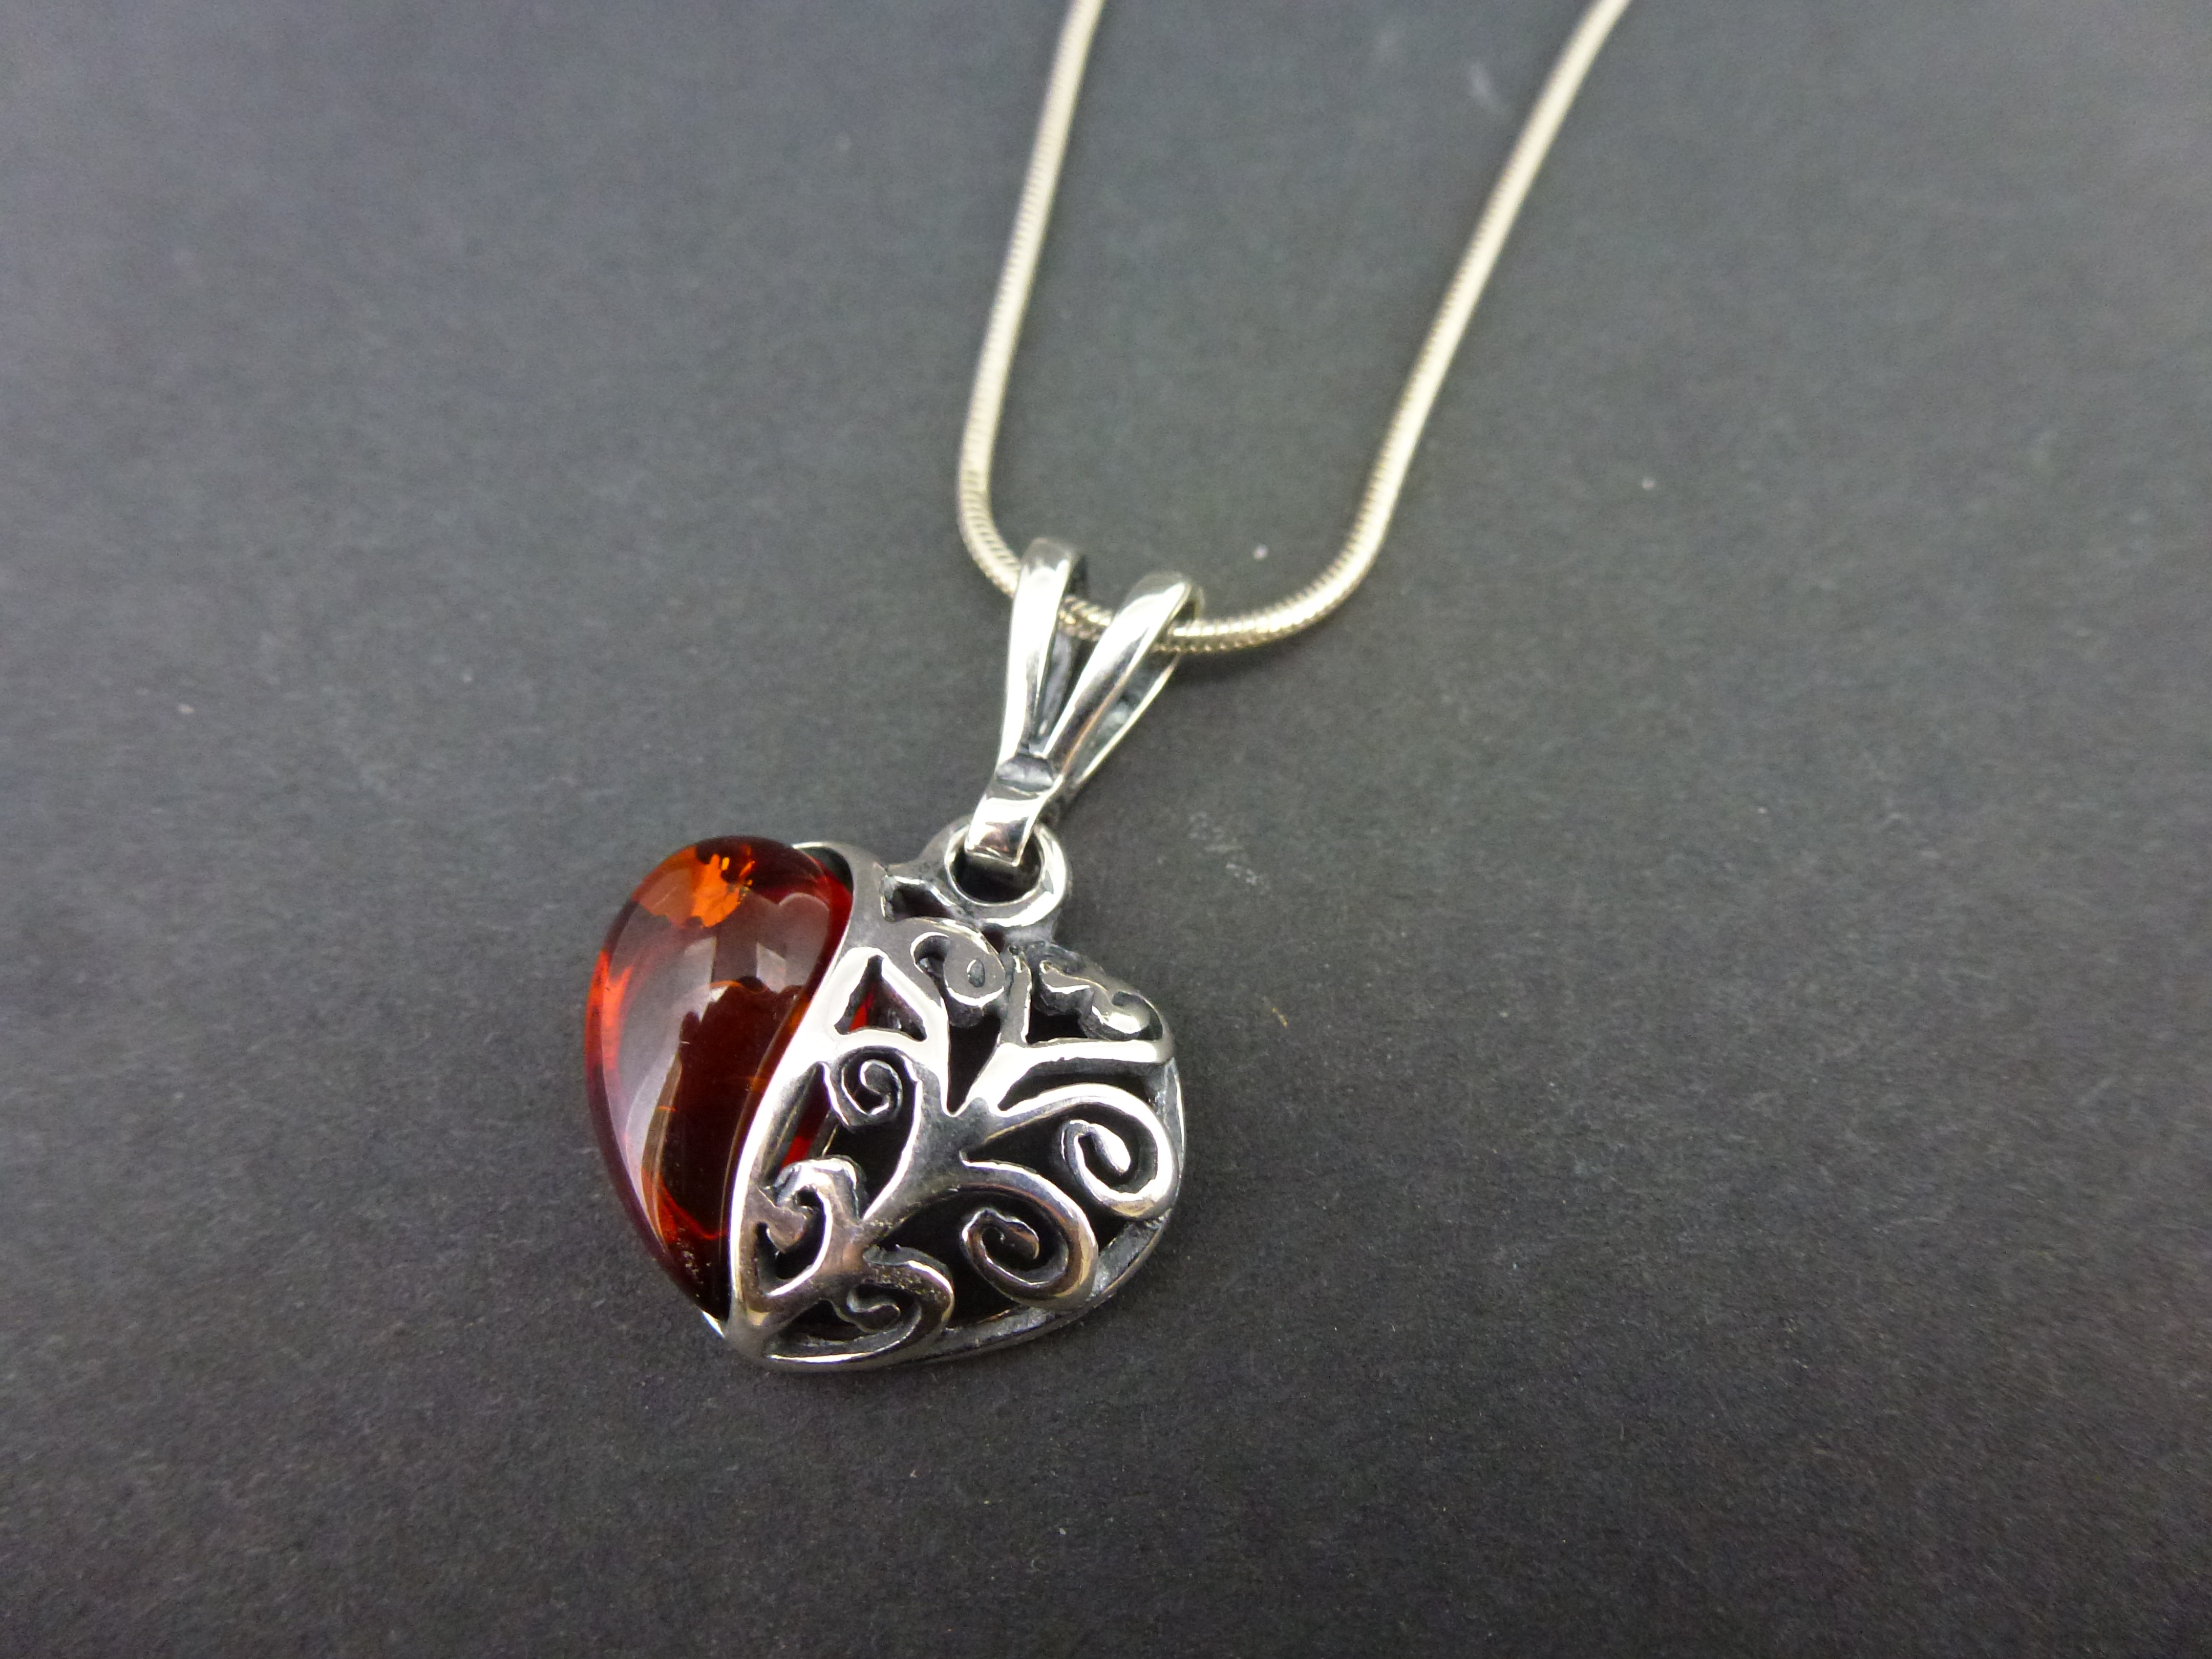 Decorative Sterling Silver with Baltic Amber Heart Pendant & 16 inch Sterling Silver Snake Chain